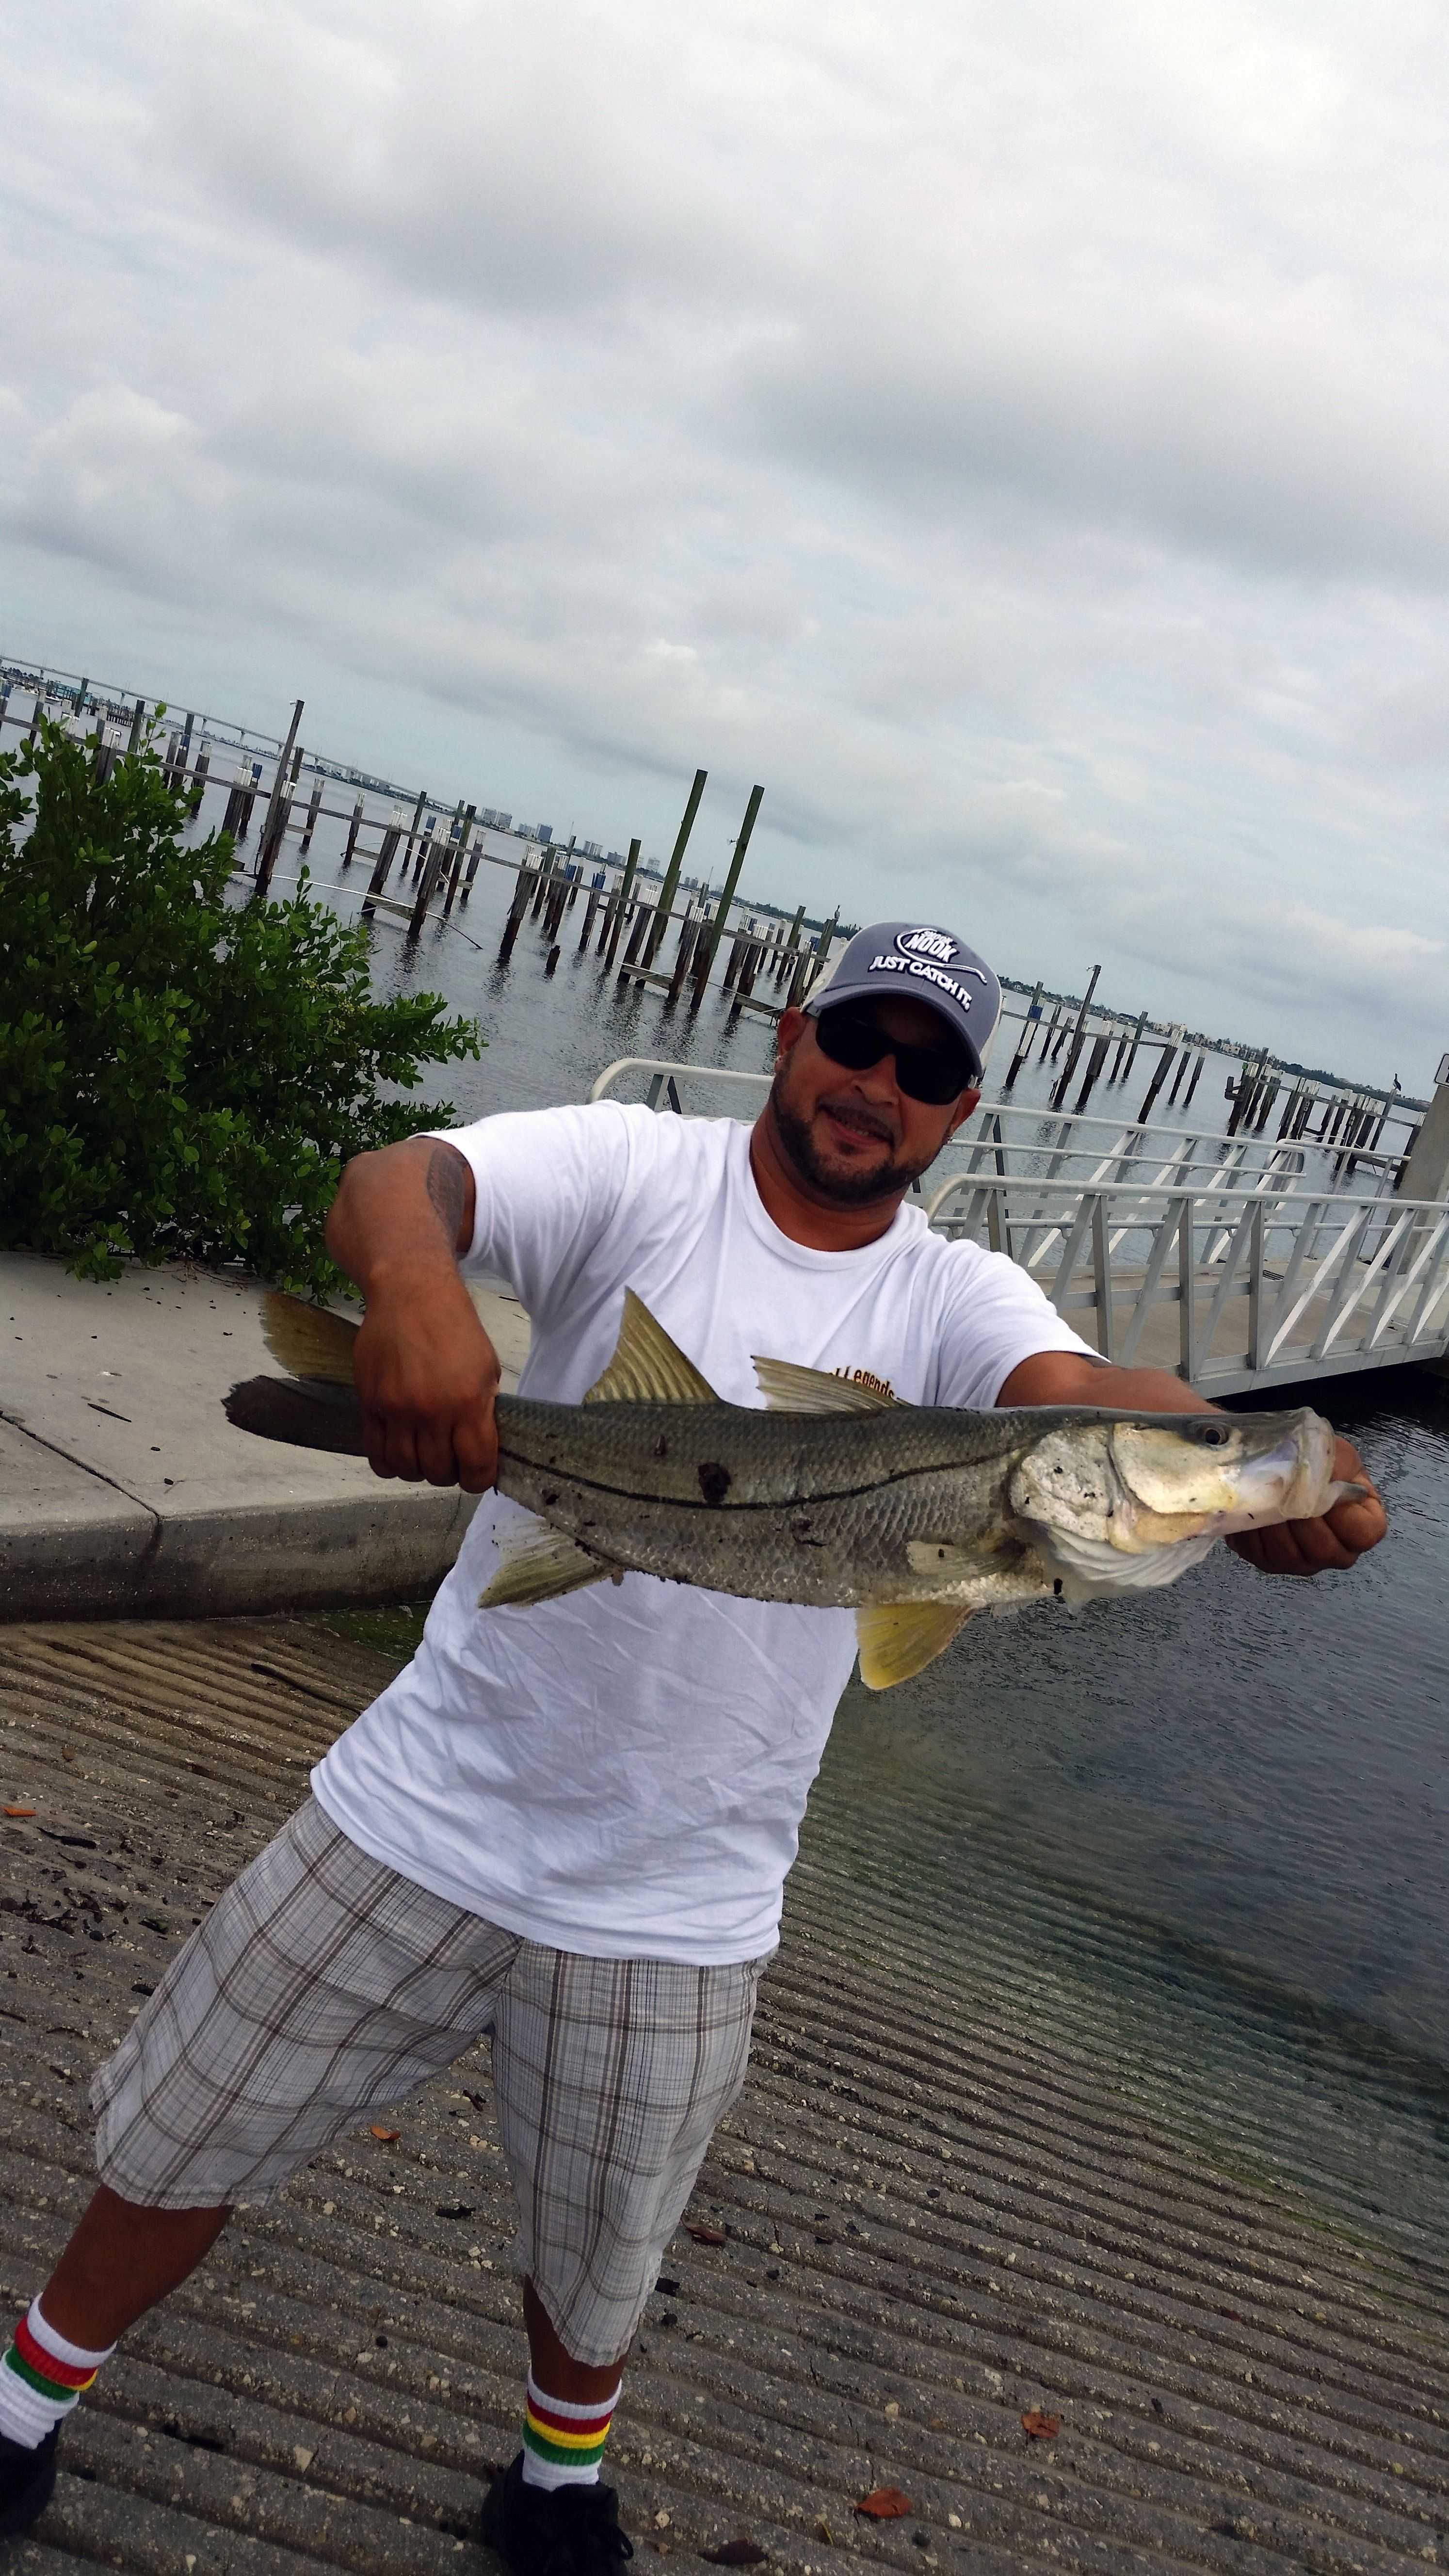 Charlie Hill caught this 29 inch snook. First cast on a Bait Buster, in about 2 feet of water in Jensen Beach. Photo taken by Machelle DeSantiago.